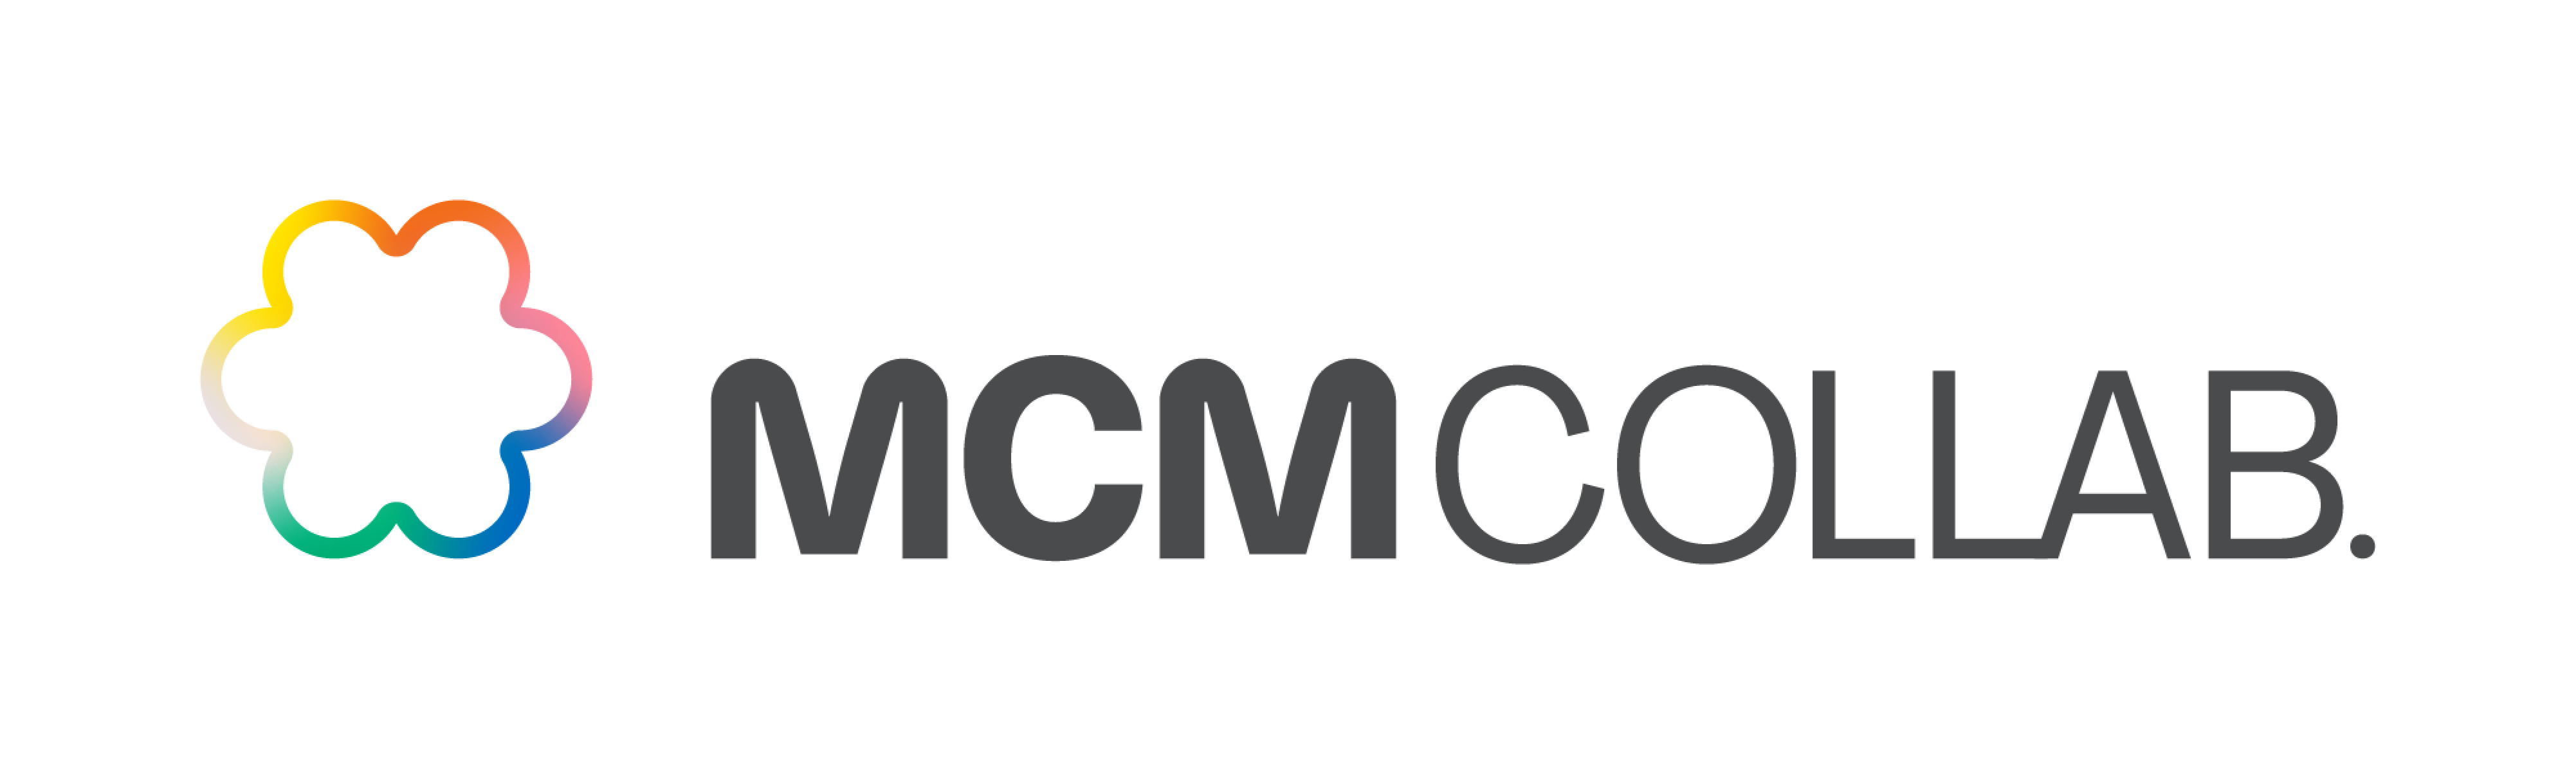 MCM Collaborative NYC-Based Therapy Practice - we are a new york-based psychotherapy practice providing therapy for LGBTQ people of color